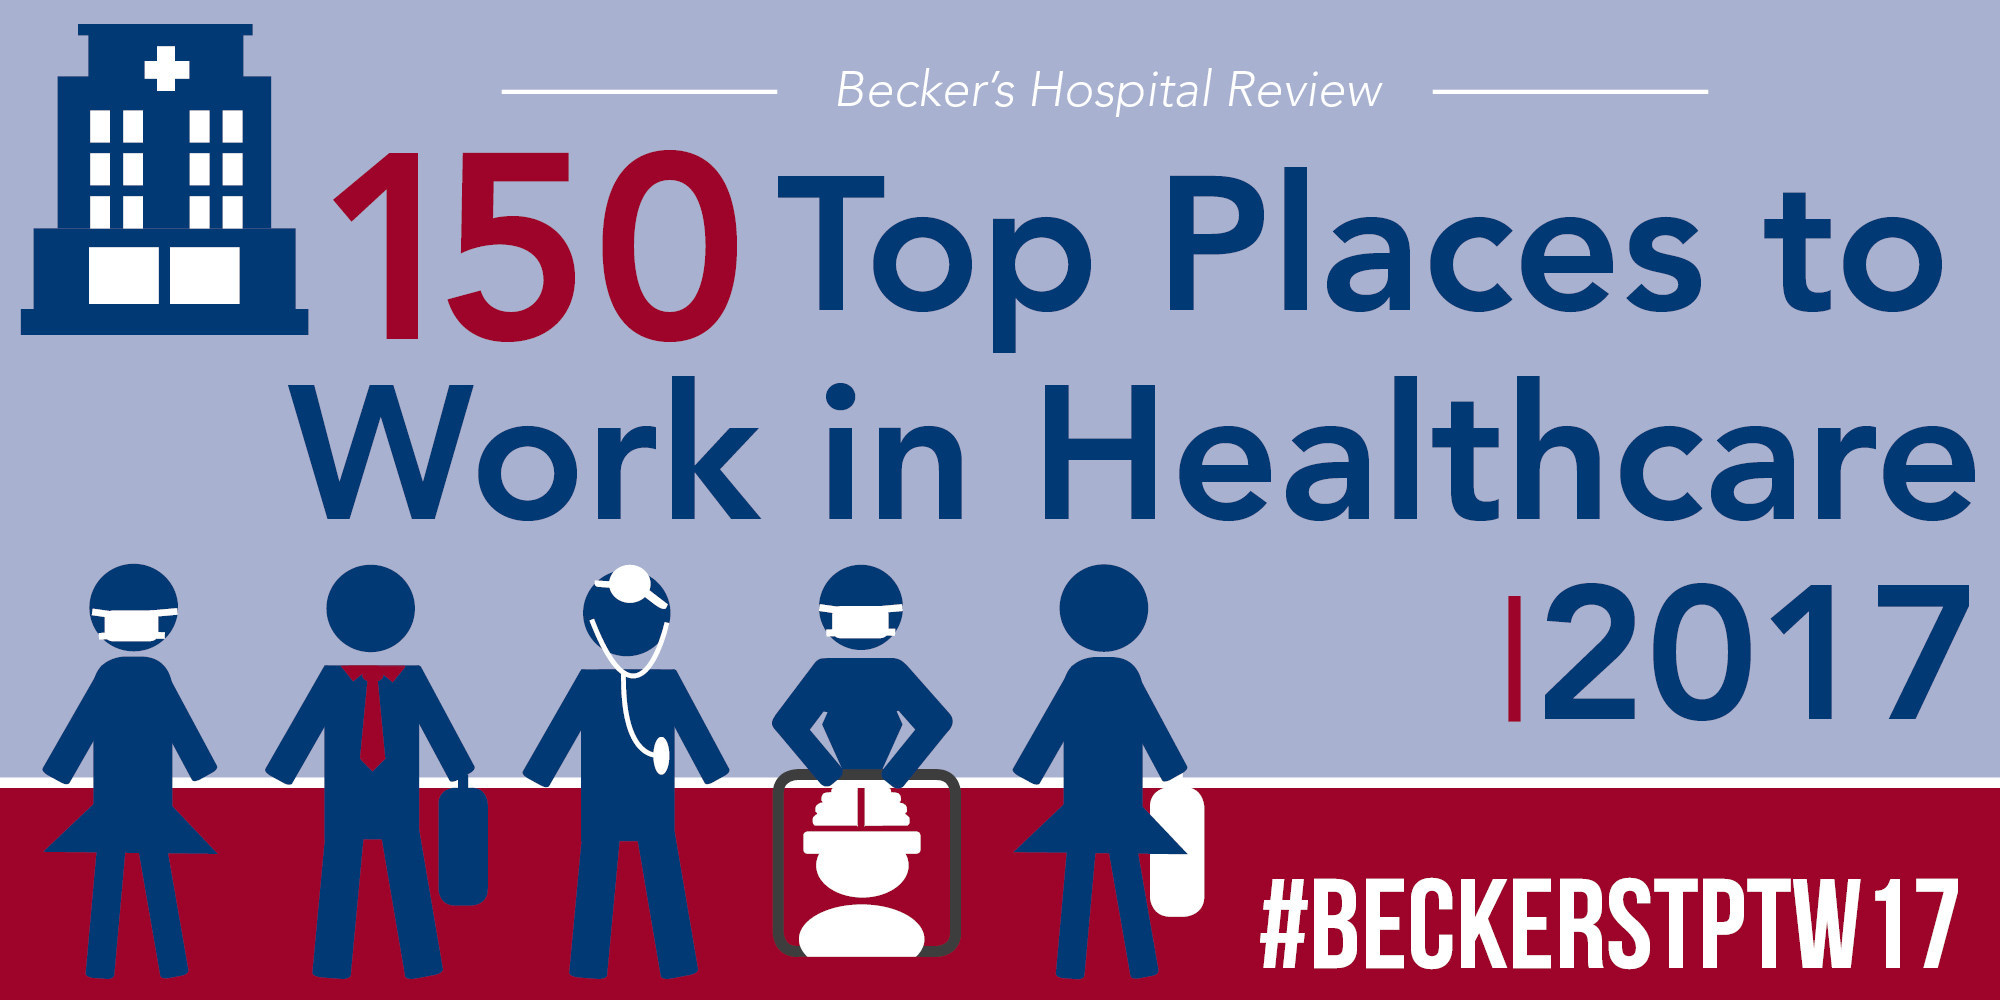 Evolent Health Selected Among 150 Top Places to Work in Healthcare by